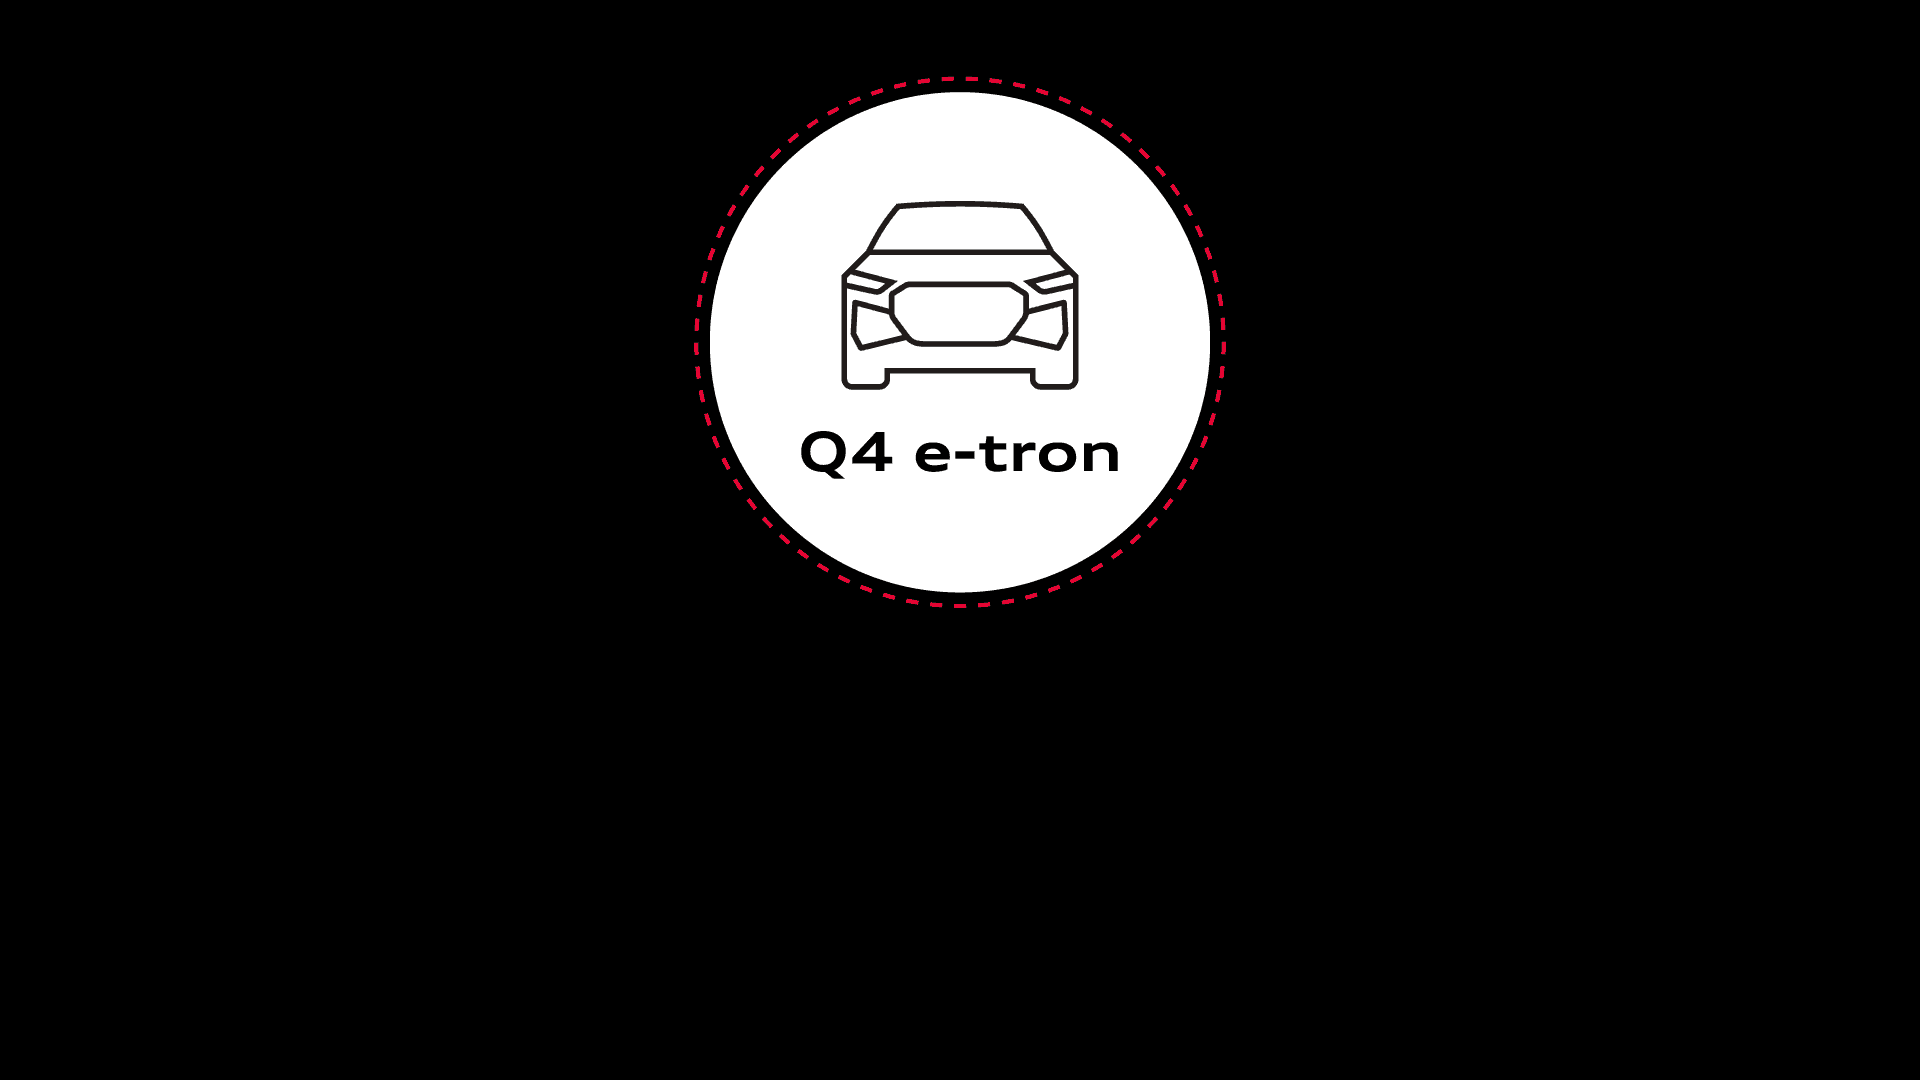 An infographic depicting the four phases in the life cycle of the Audi Q4 e-tron in stylised form.